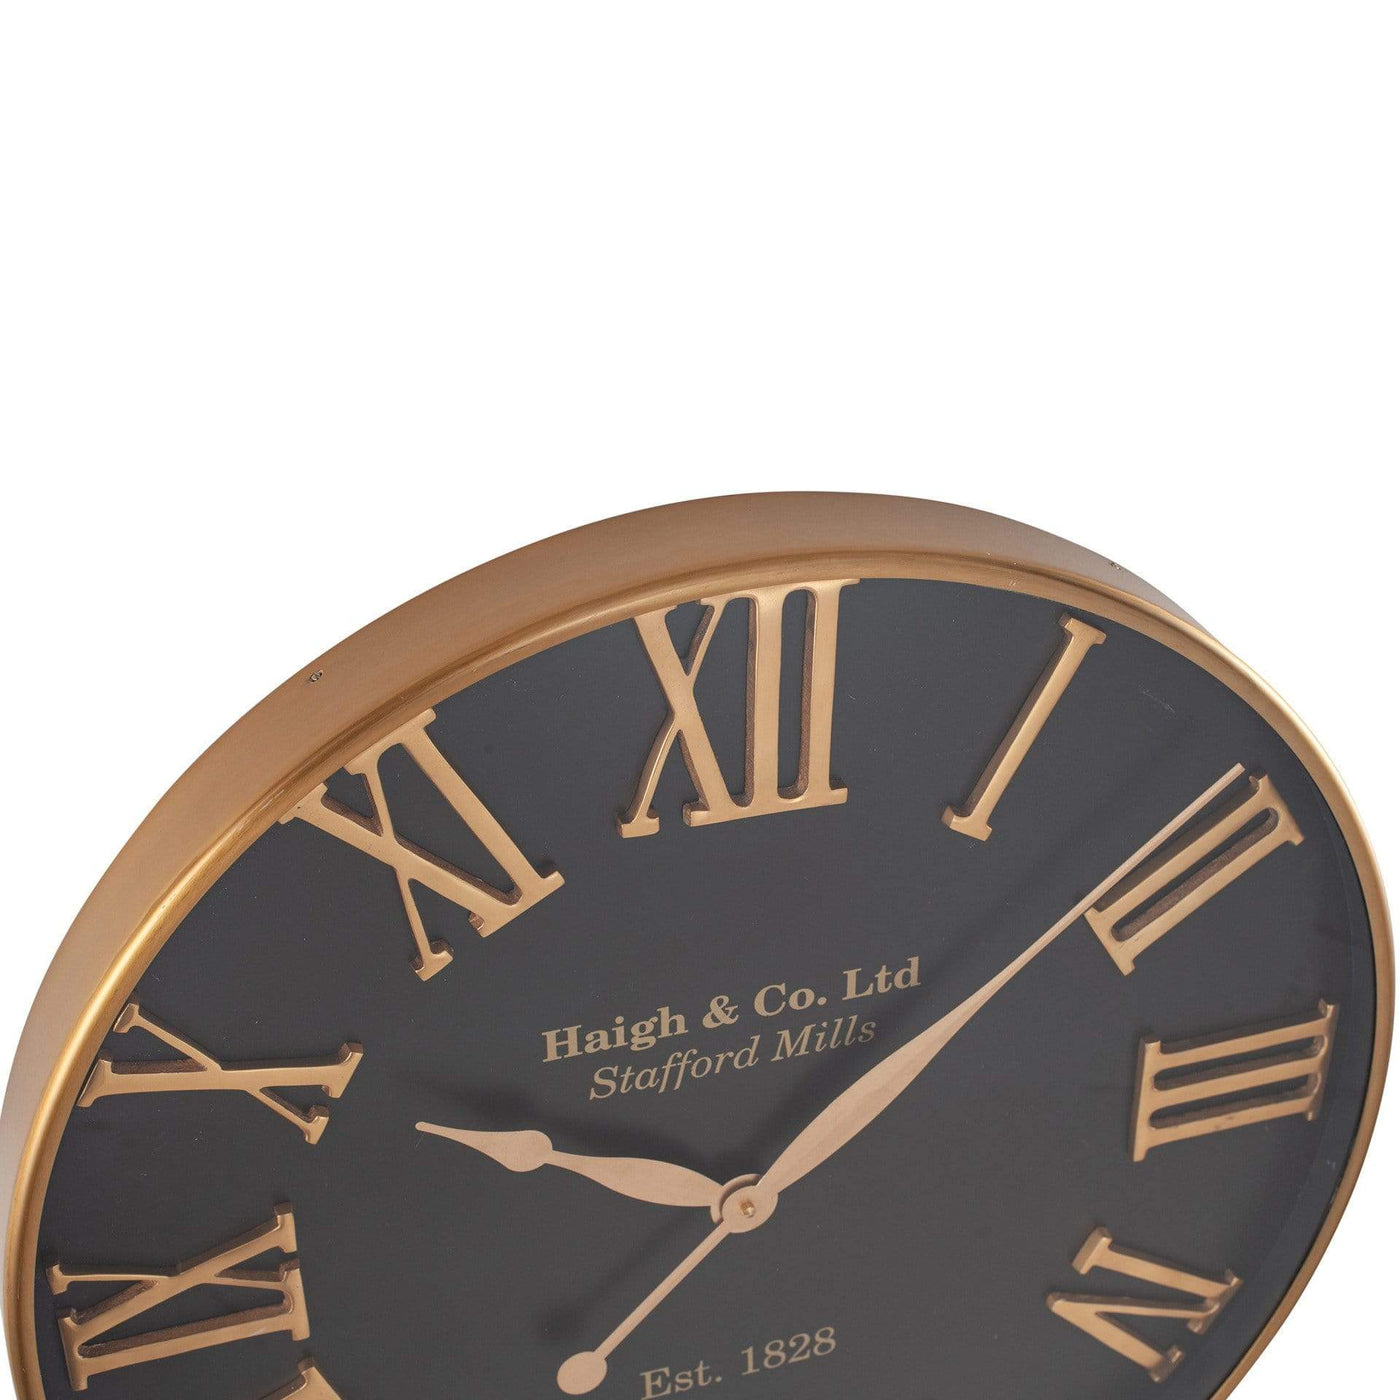 Pacific Lifestyle Accessories Antique Gold and Black Metal Round Wall Clock House of Isabella UK